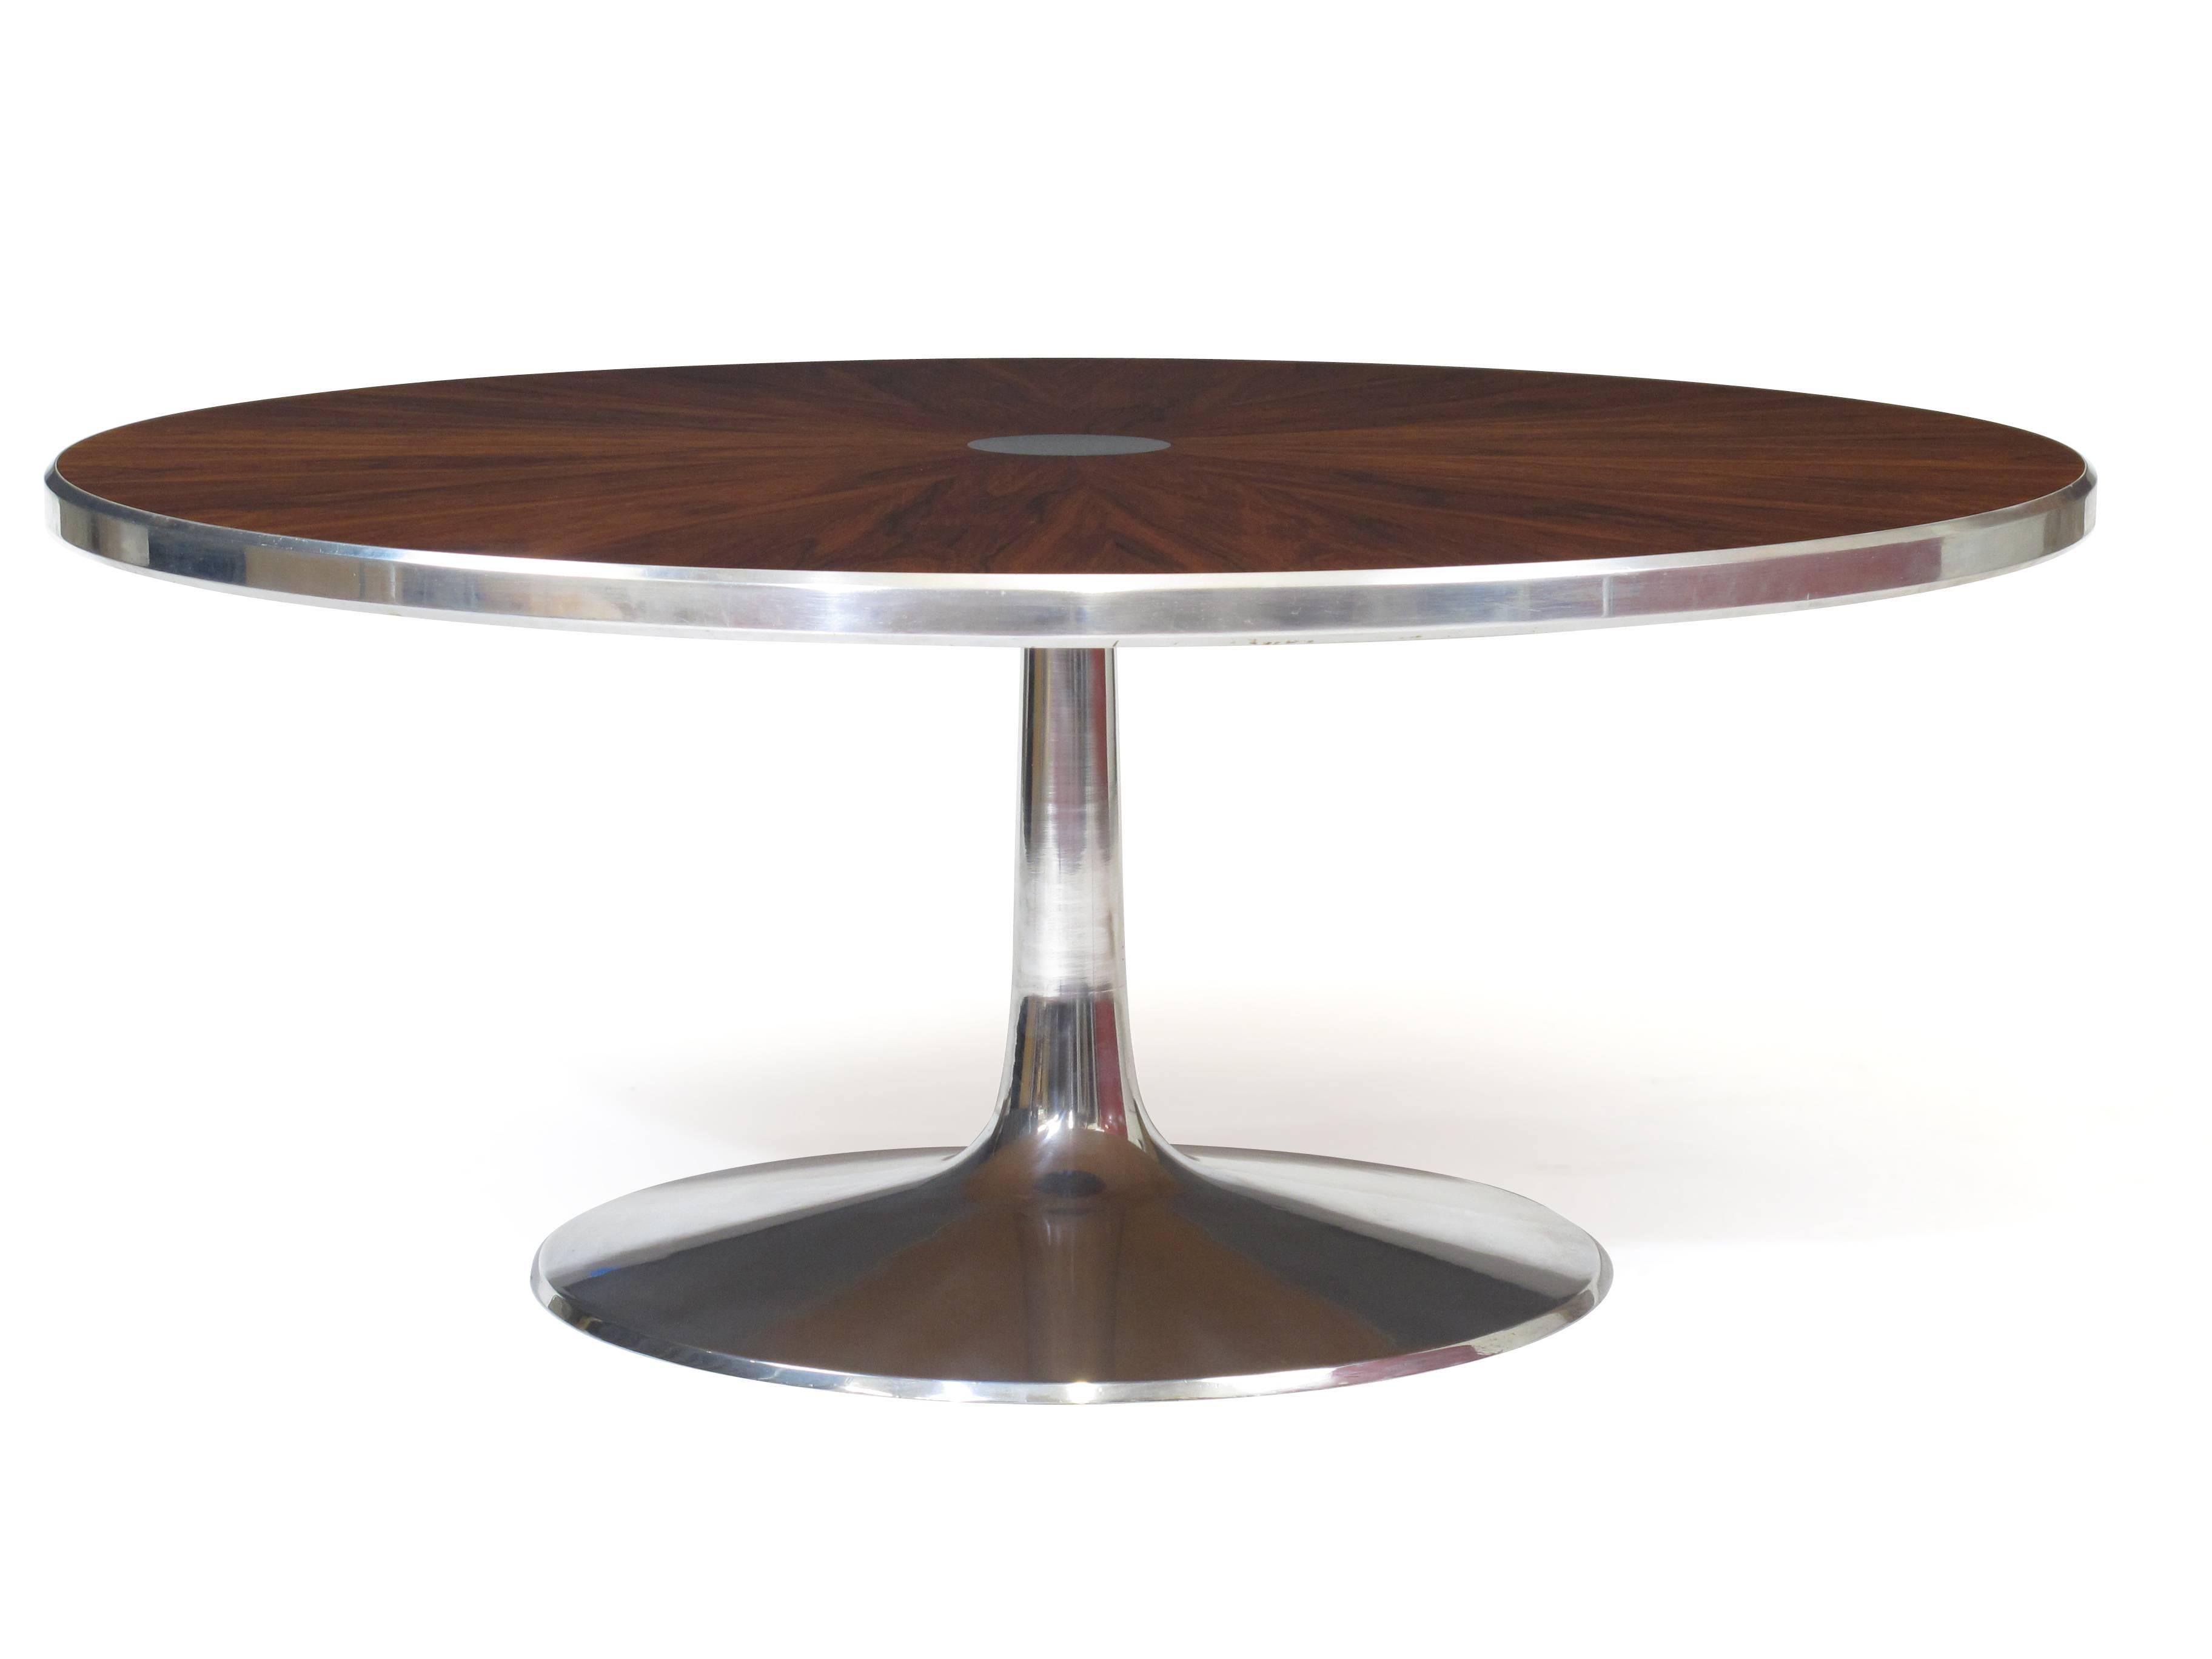 Mid-Century Danish coffee table designed by Steen Ostergaard for Poul Cadovius. Stunning rosewood arranged in a book matched star pattern around an aluminum disc in center, silver aluminum trim on outer edge, raised on a polished pedestal base.